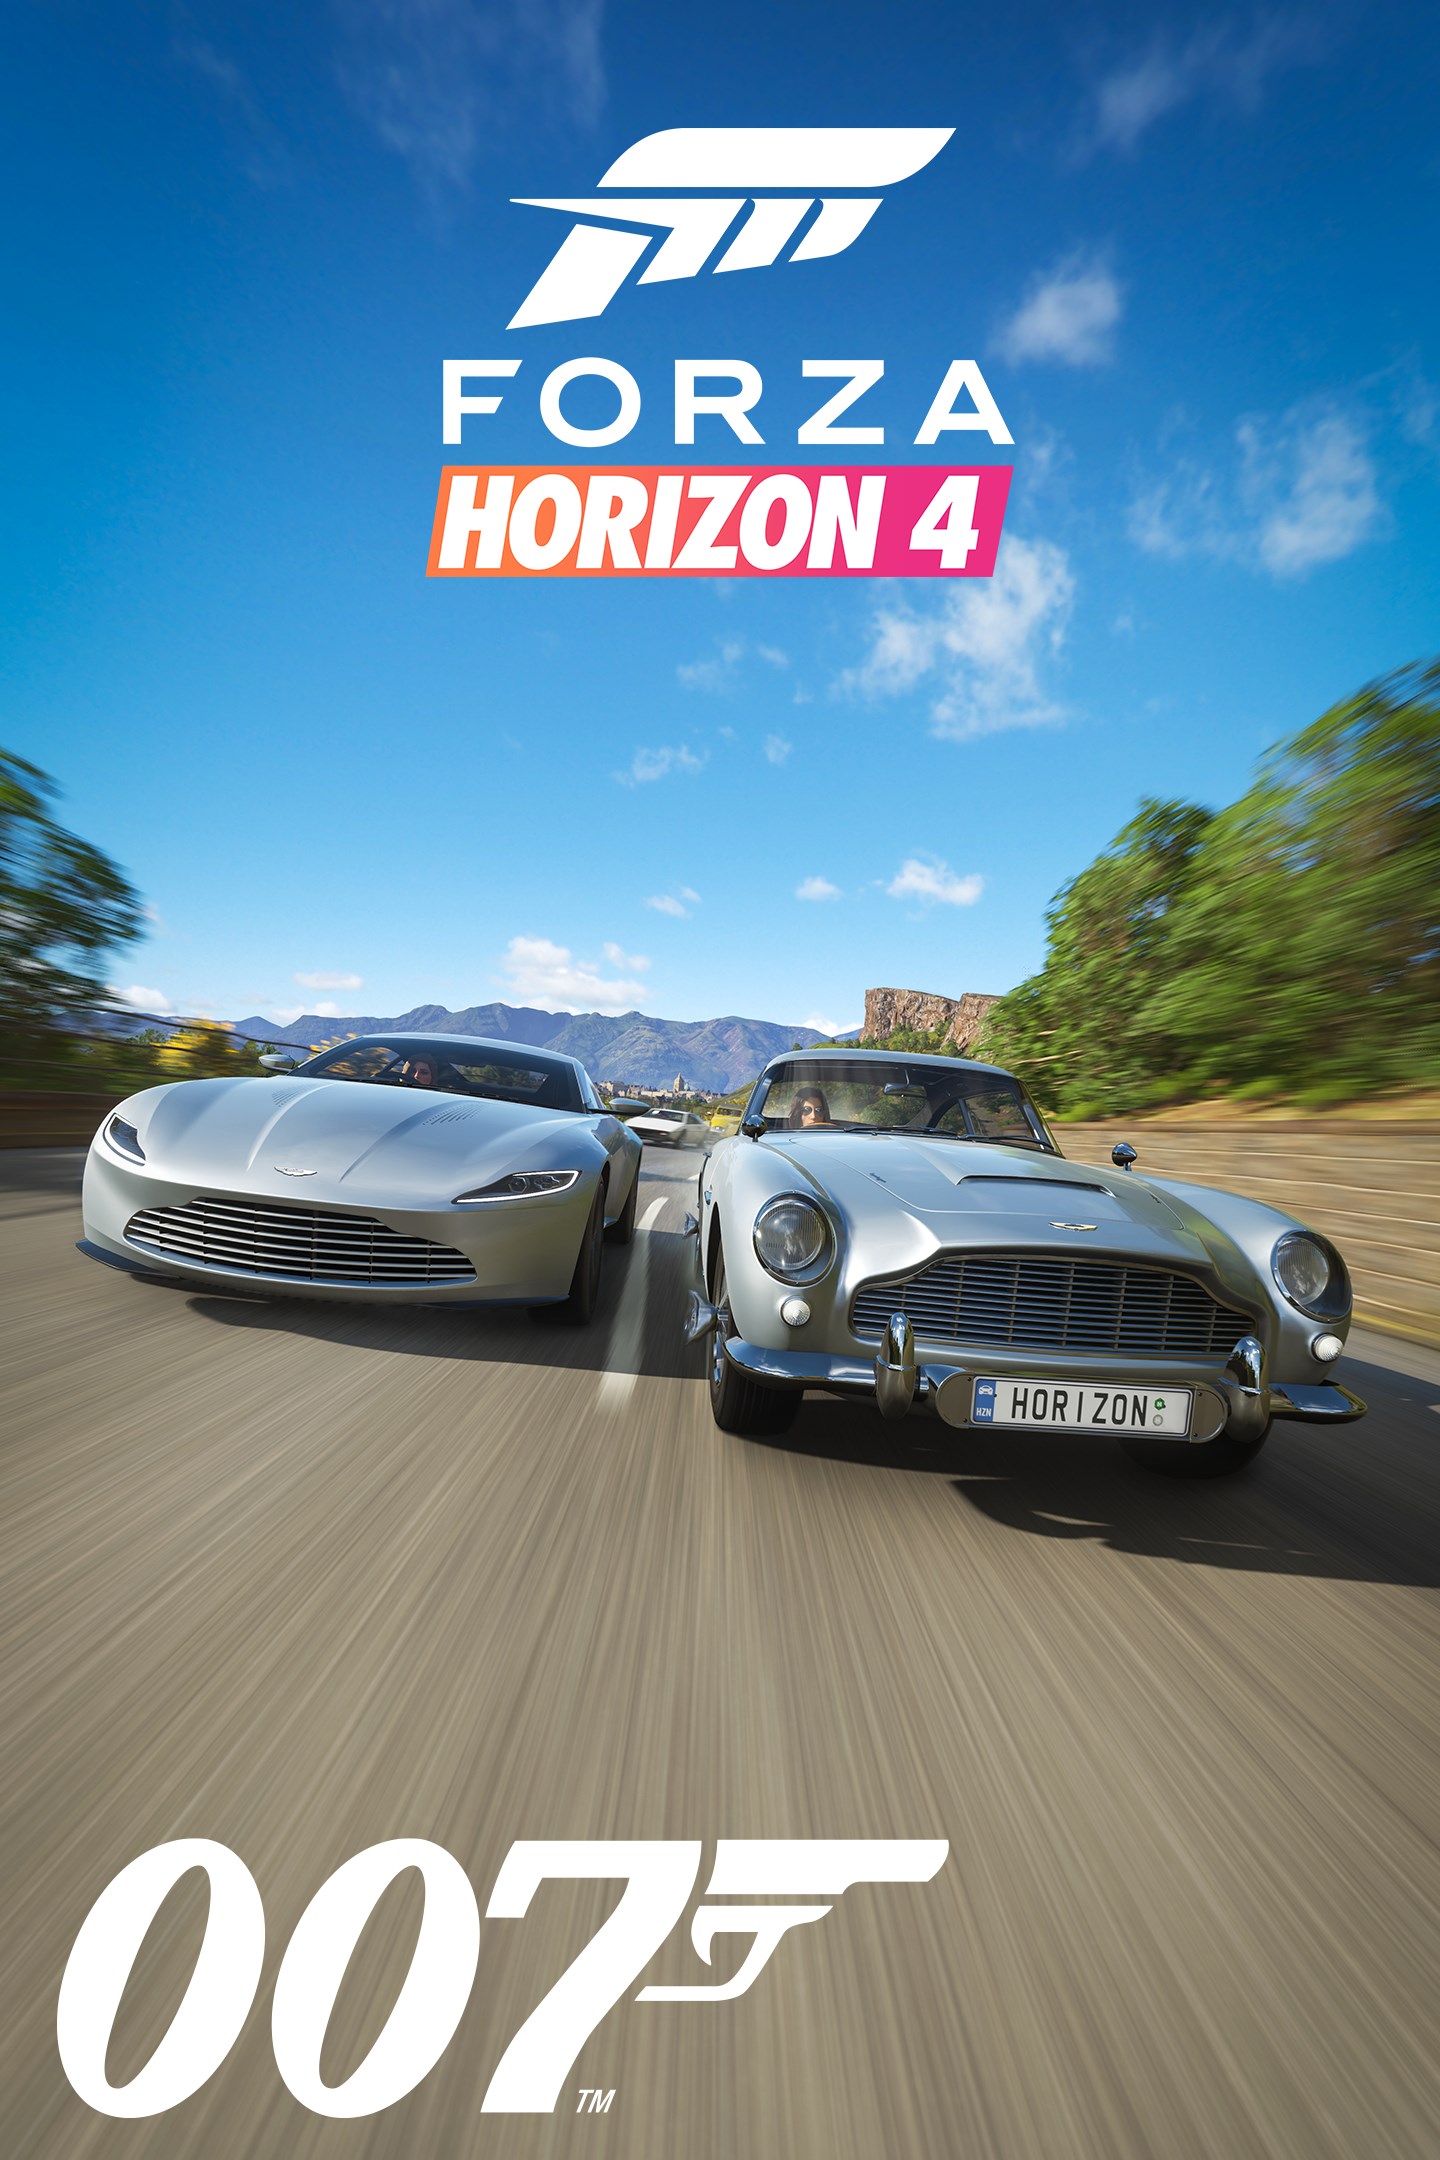 release date of forza horizon 4 ultimate edition